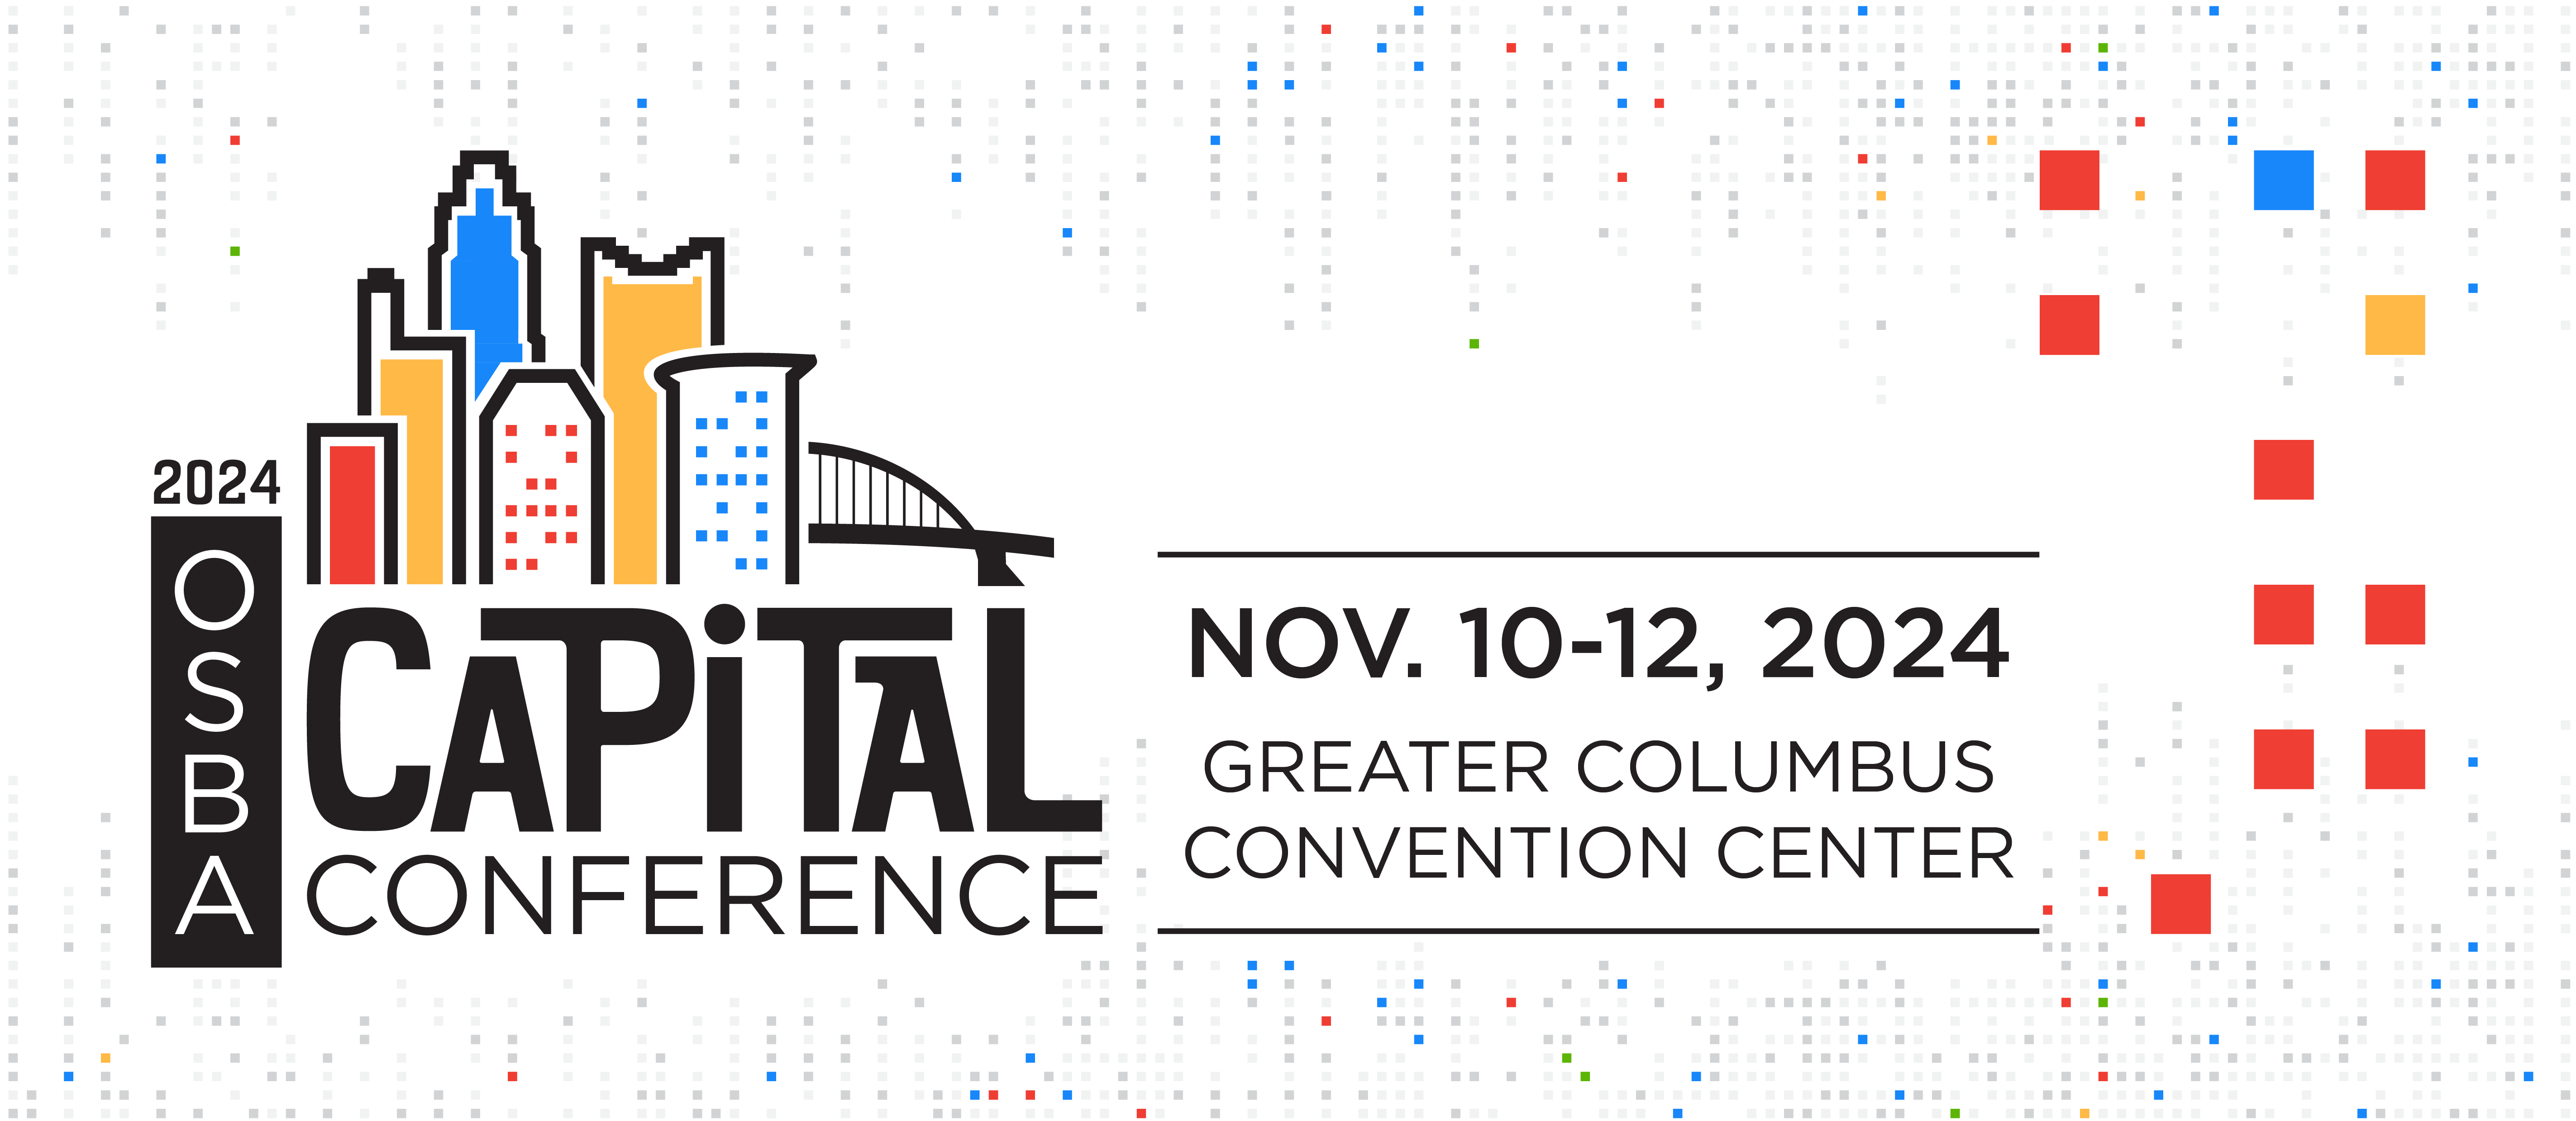 2024 Capital Conference Logo, Date, and Location